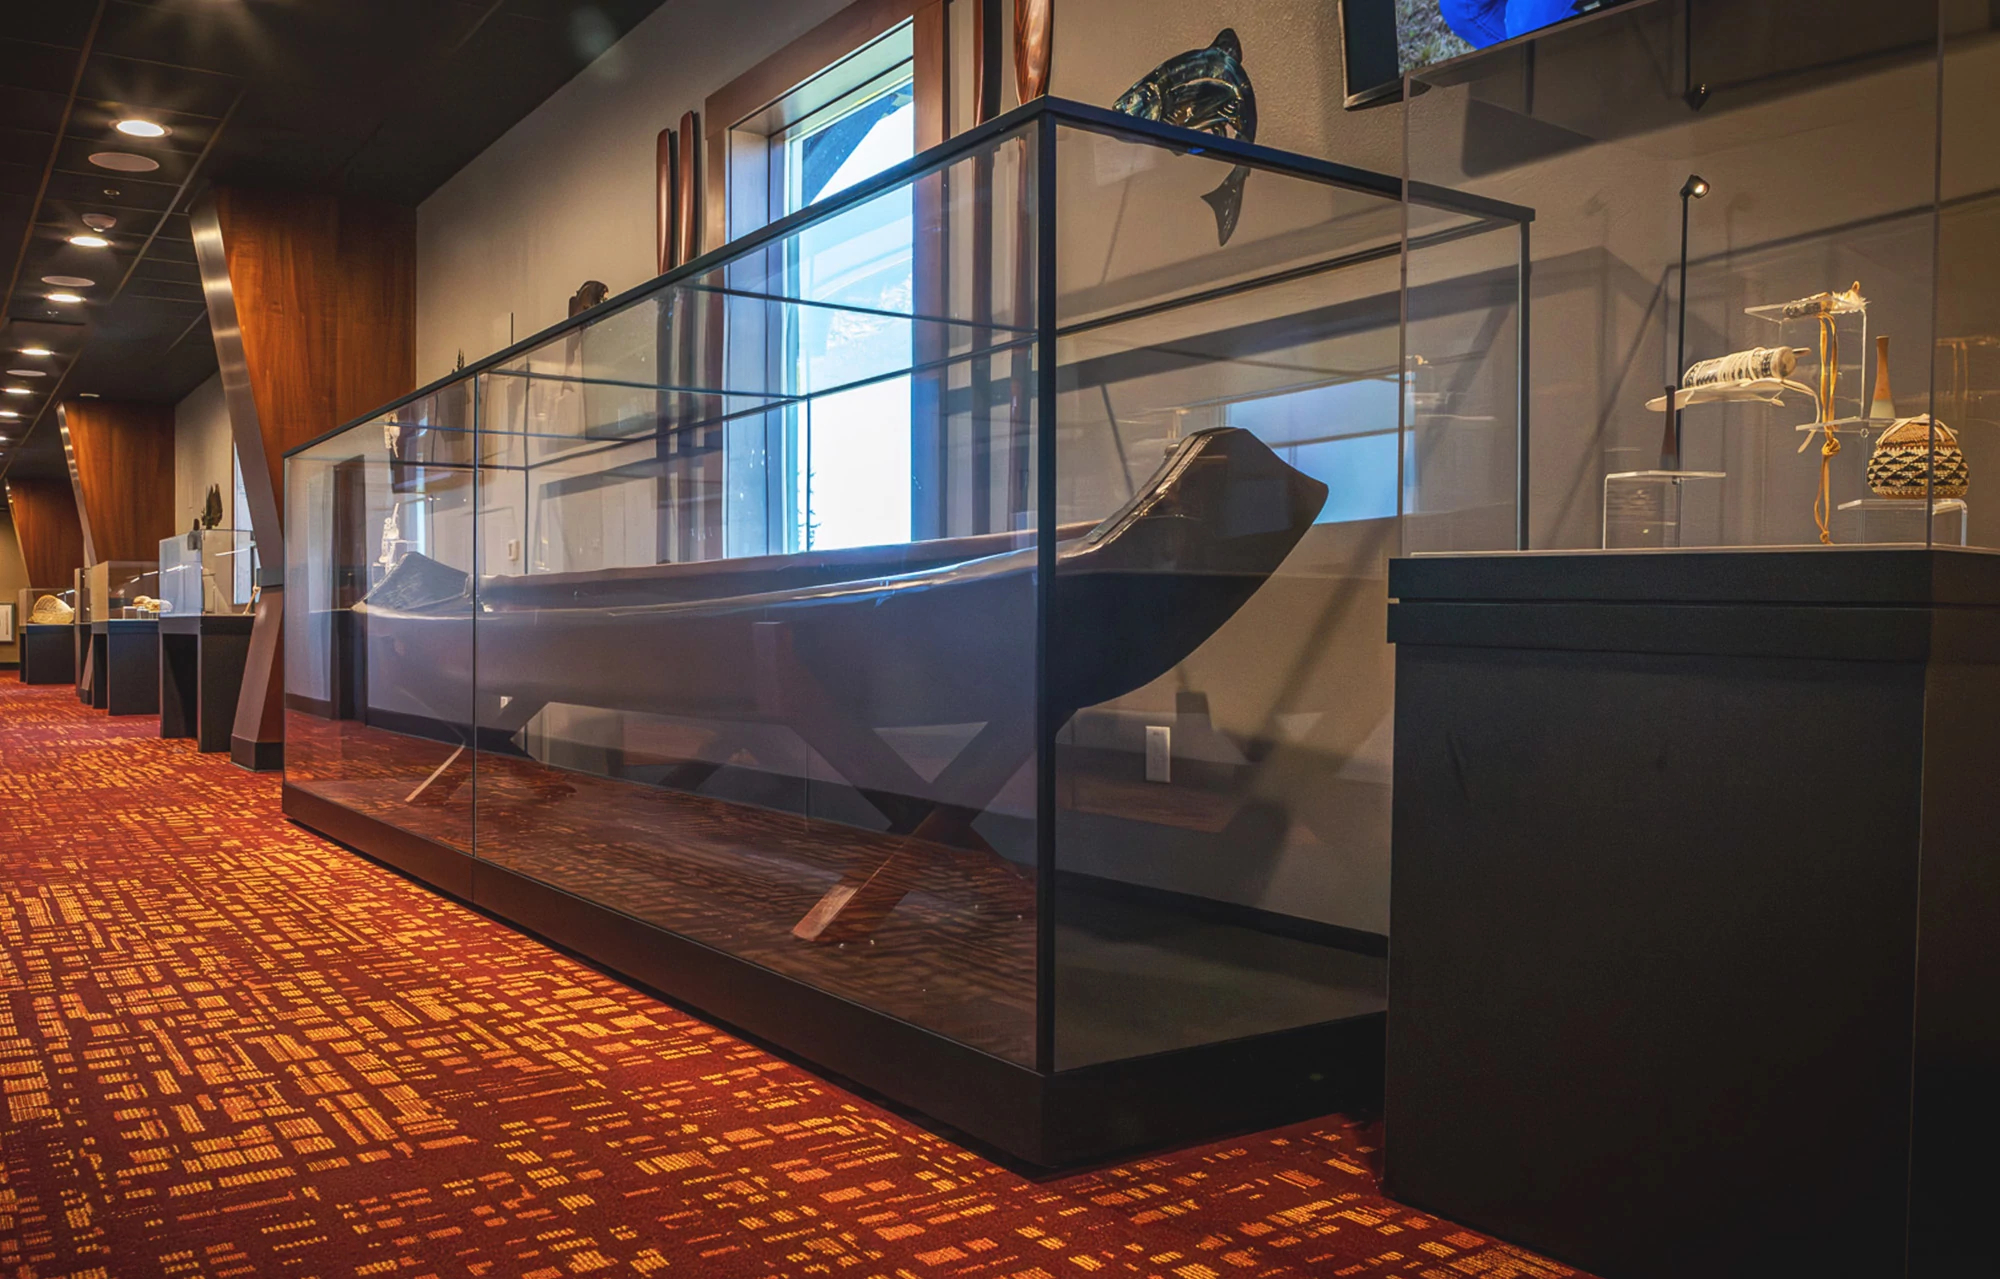 Trophy cases from Grand Rapids colleges tell unique history of